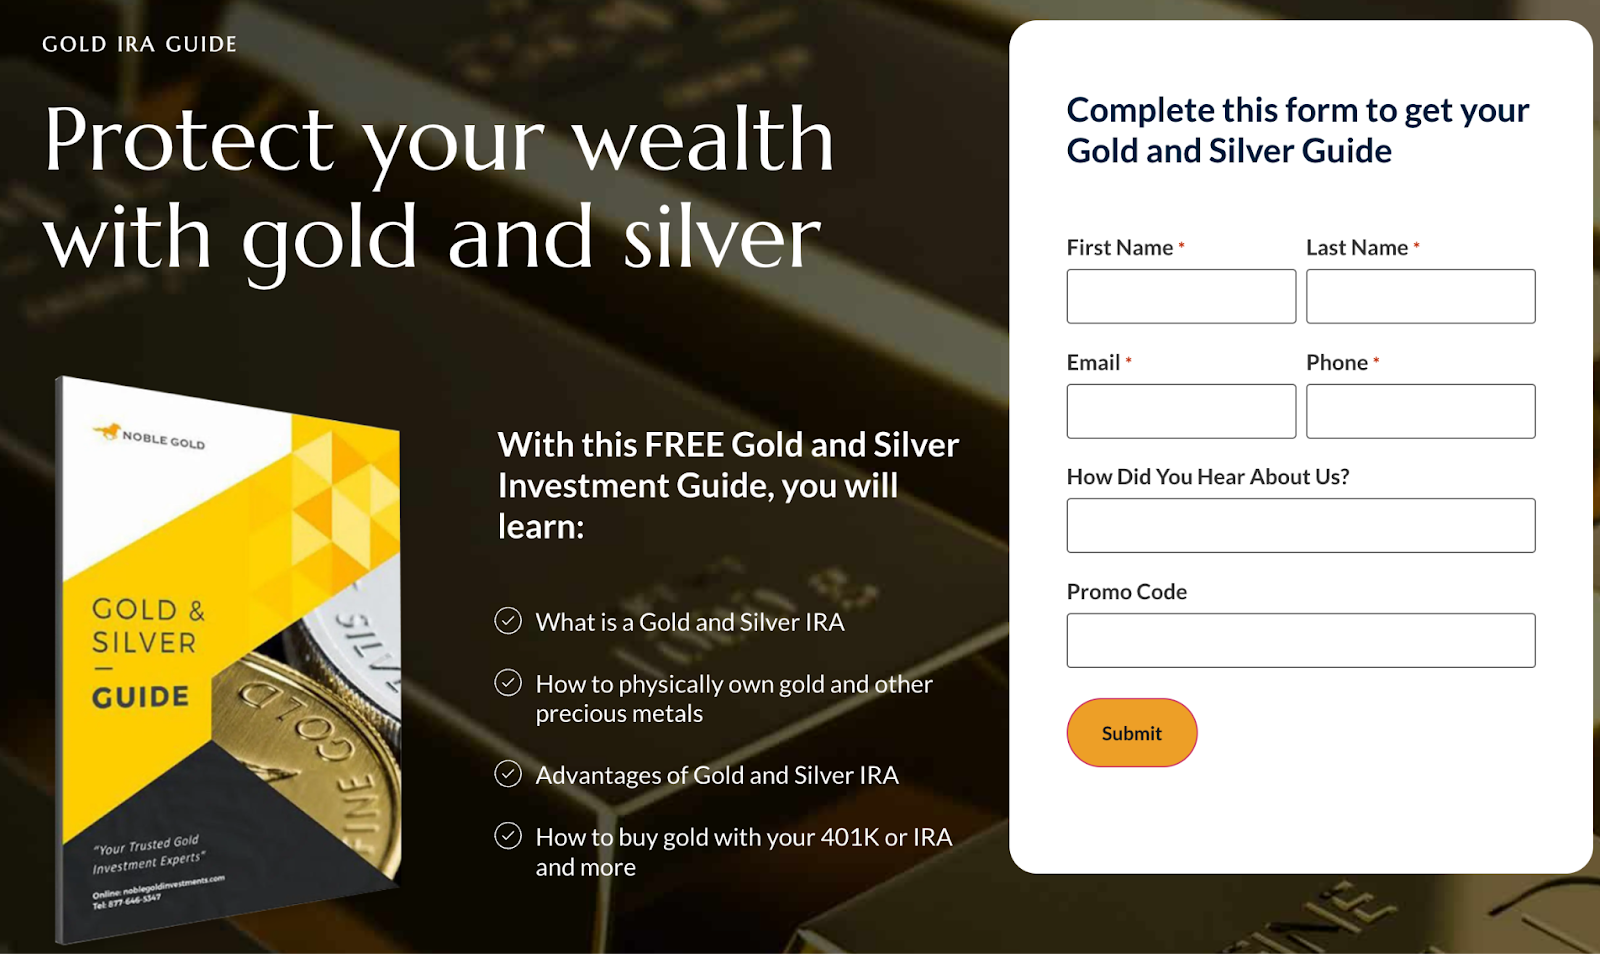 Image from Noble Gold's website to complete a form for a free gold and silver guide